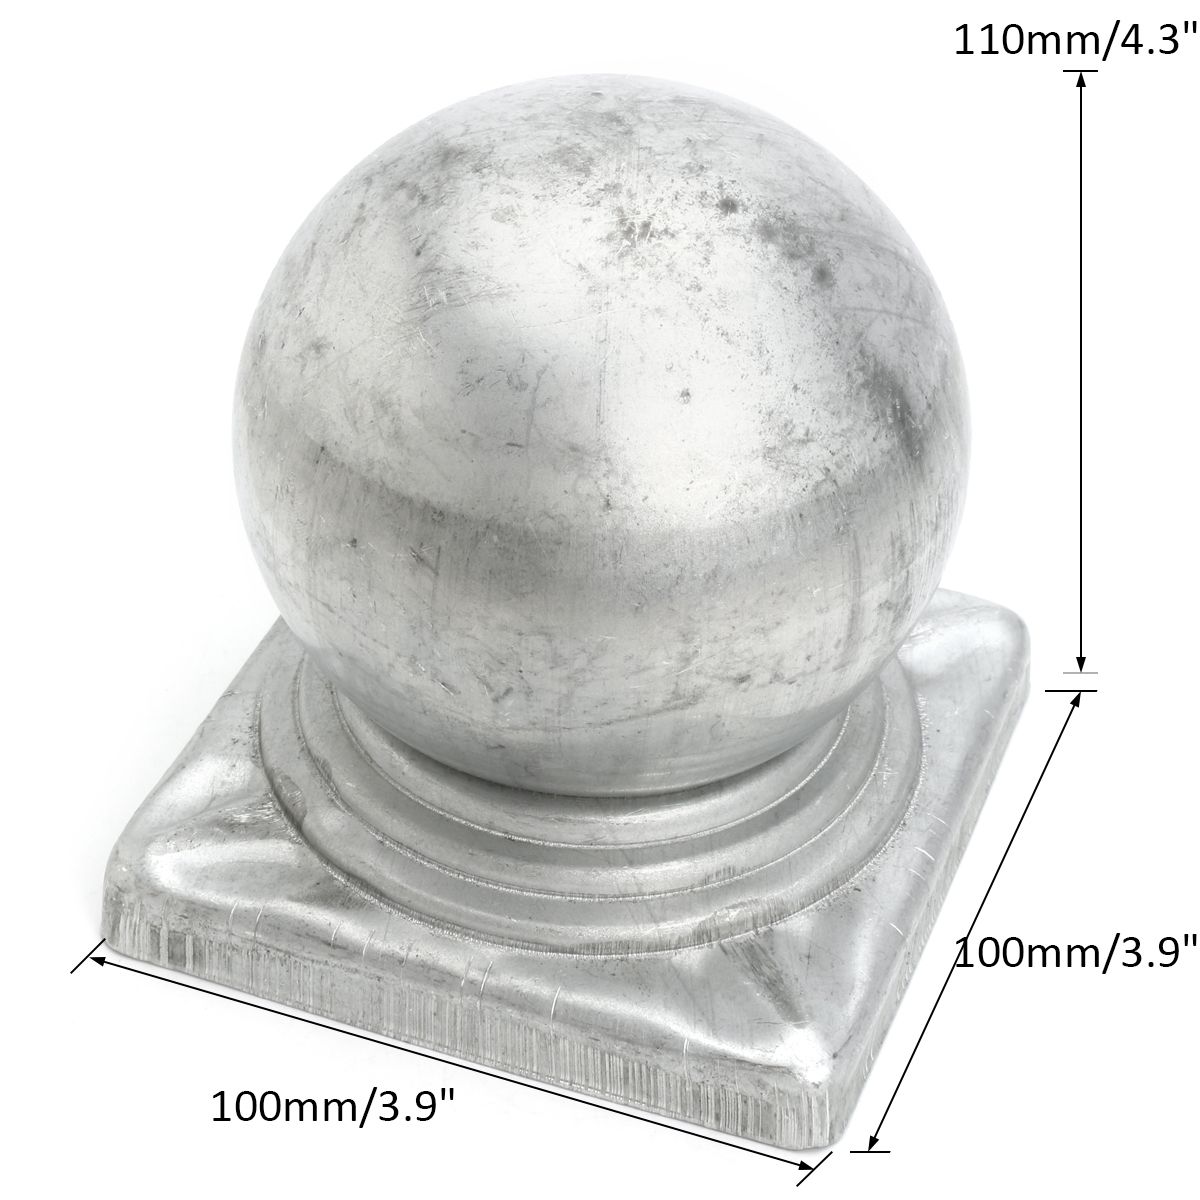 100mm-Iron-Ball-Top-Fence-Finial-Post-Cap-with-Flat-Square-Base-Decor-Protection-1209791